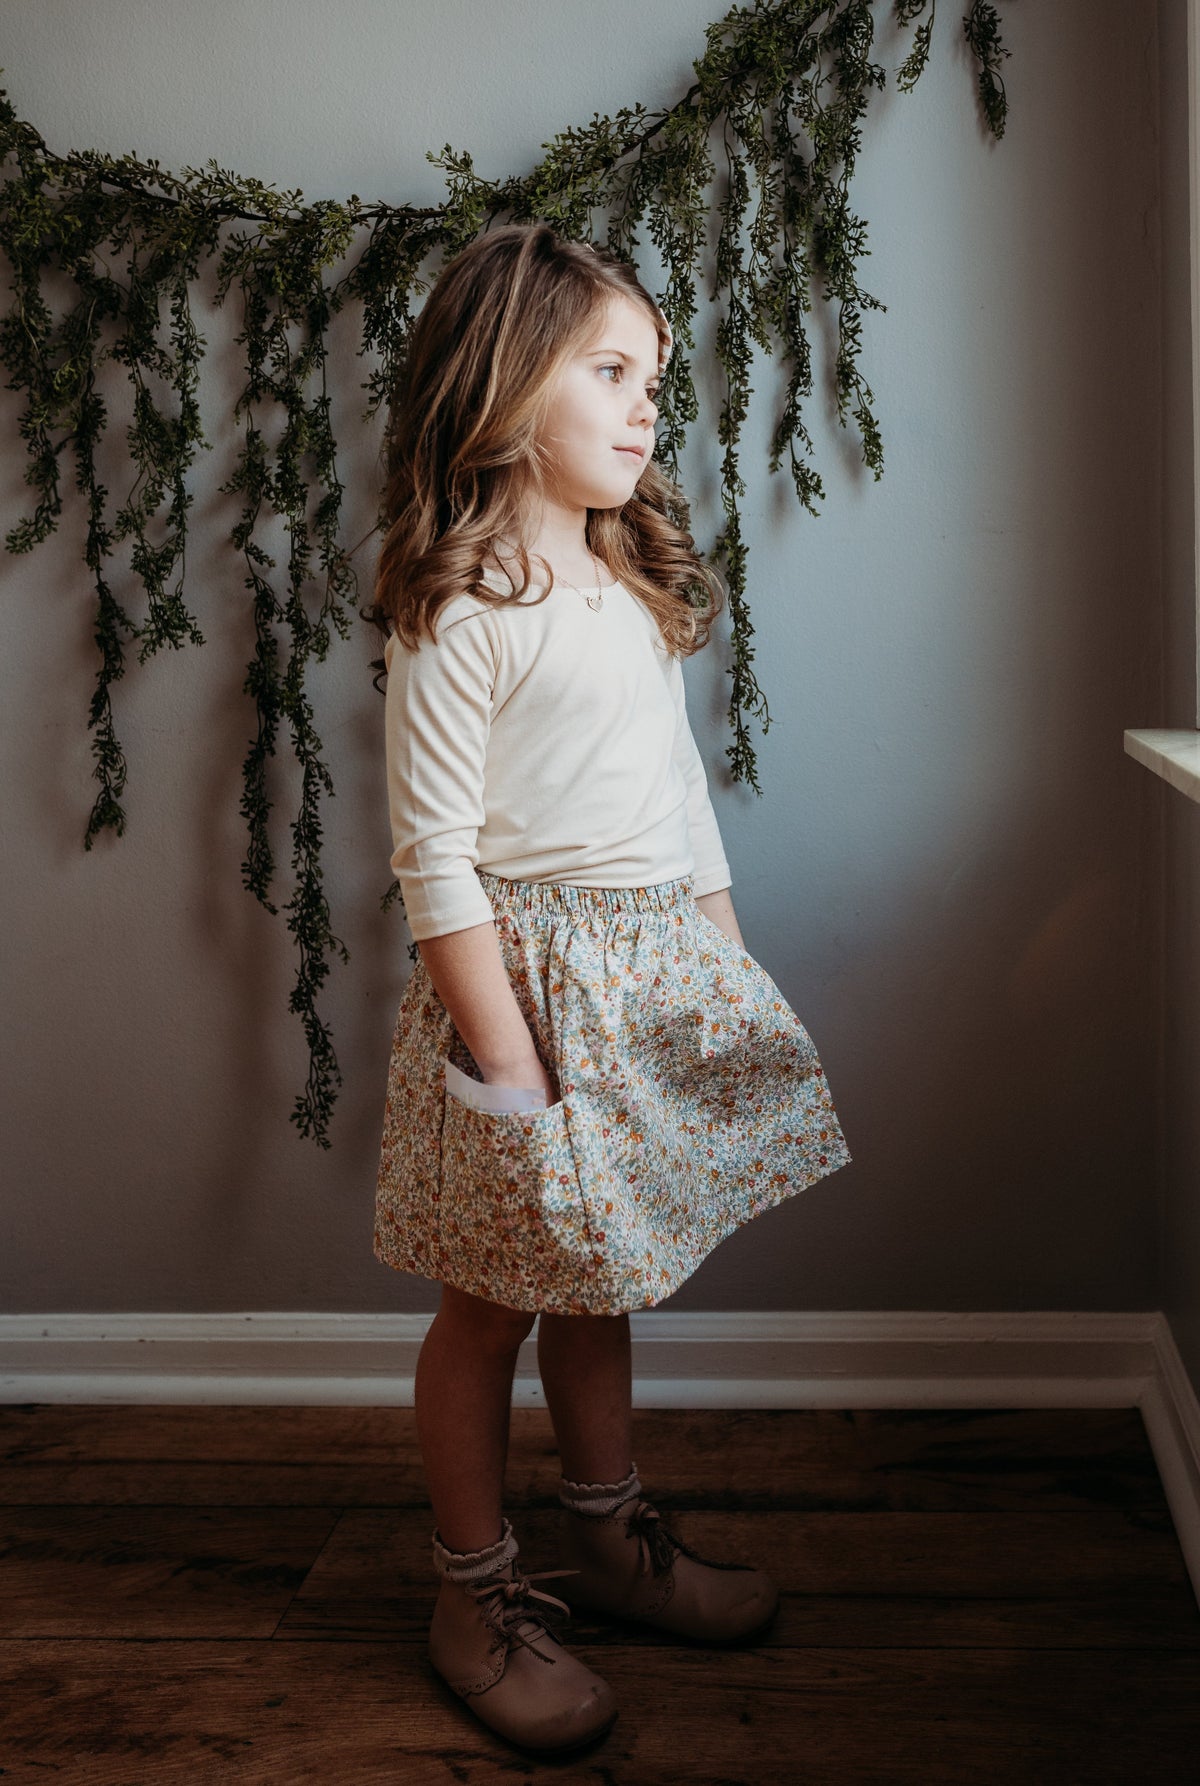 Christiana Skirt in 'Holly Plaid' - Ready To Ship